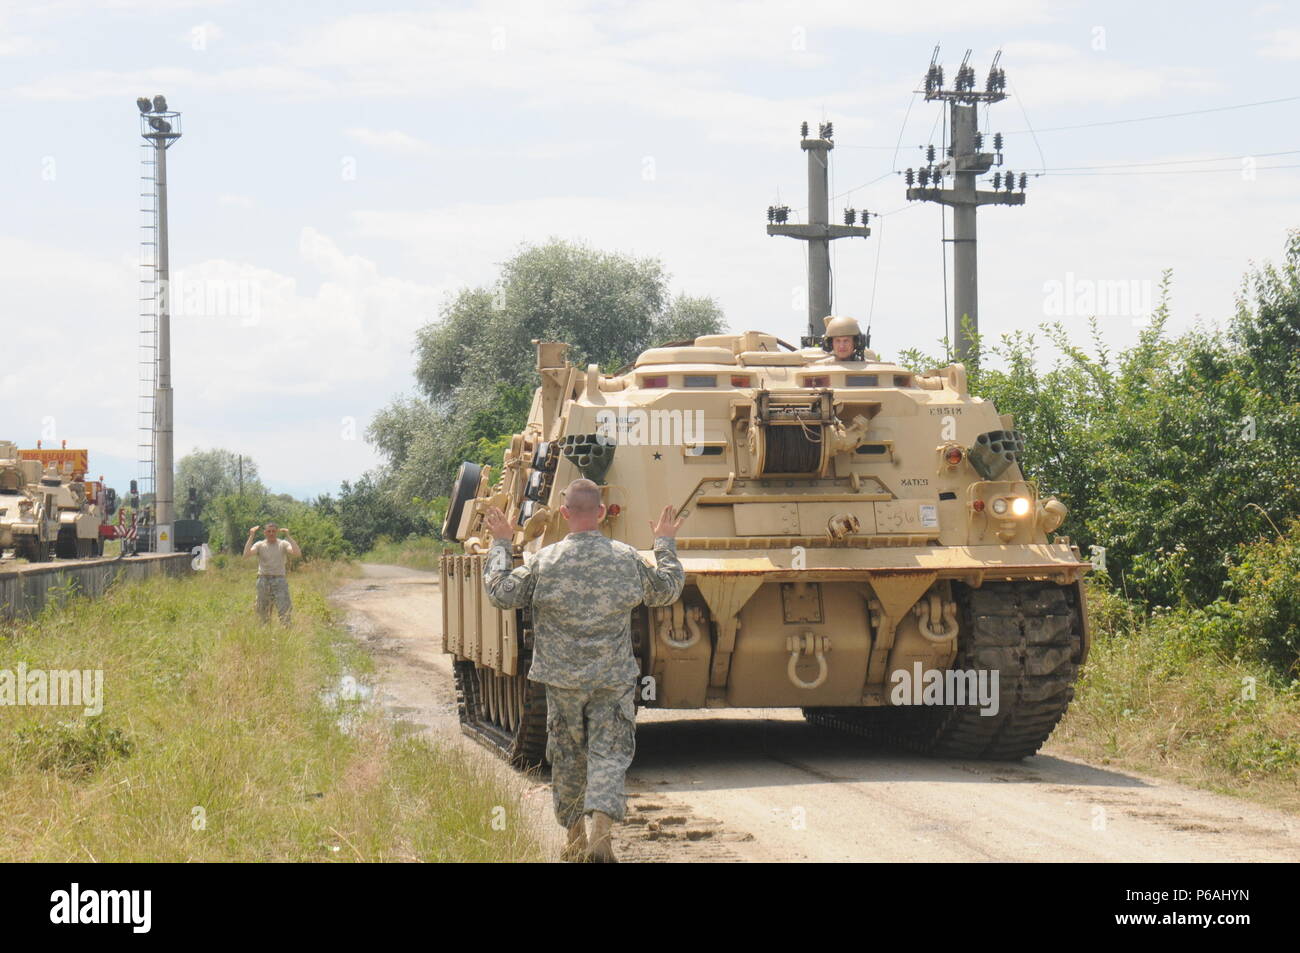 CINCU, Romania - A U.S. Soldier guides an M88 Hercules Recovery Vehicle as it backs-up along a dirt road in Viola, Romania July 5. The vehicle, belonging to the 116th Cavalry Brigade Combat Team (CBCT), Idaho Army National Guard is in Romania to be used during Exercise Saber Guardian 2016, which starts July 27. The 116th CBCT is one of the U.S. units participating in the exercise, which will also include forces from 11 different countries. Stock Photo